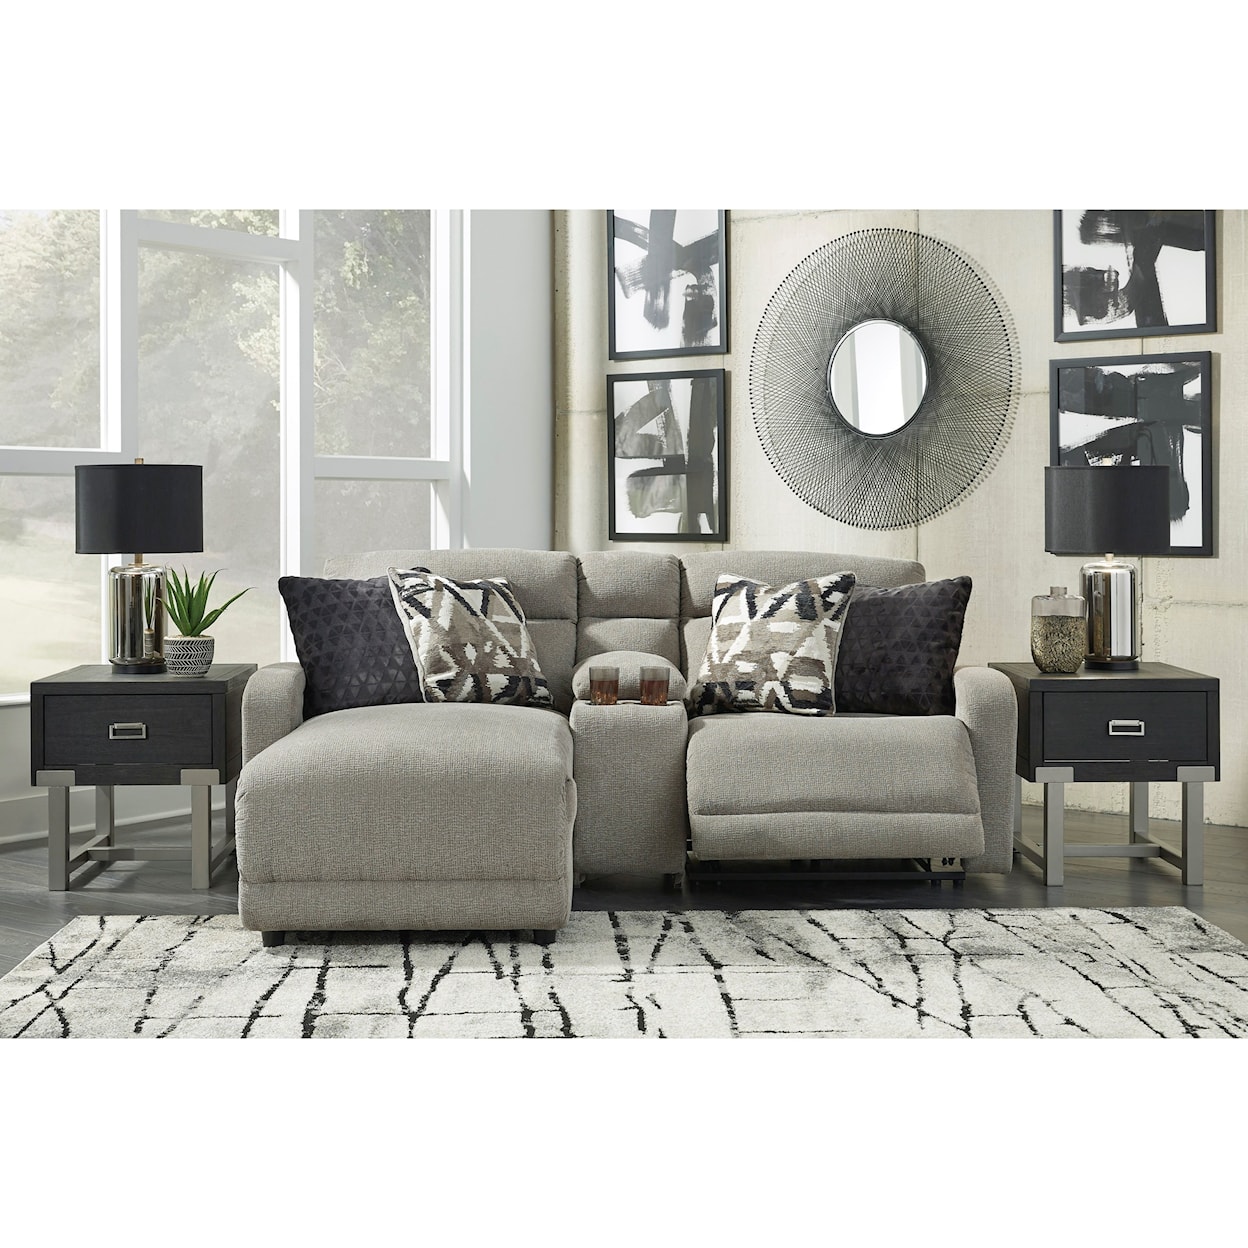 Benchcraft Colleyville 3-Piece Pwr Reclining Sectional with Chaise